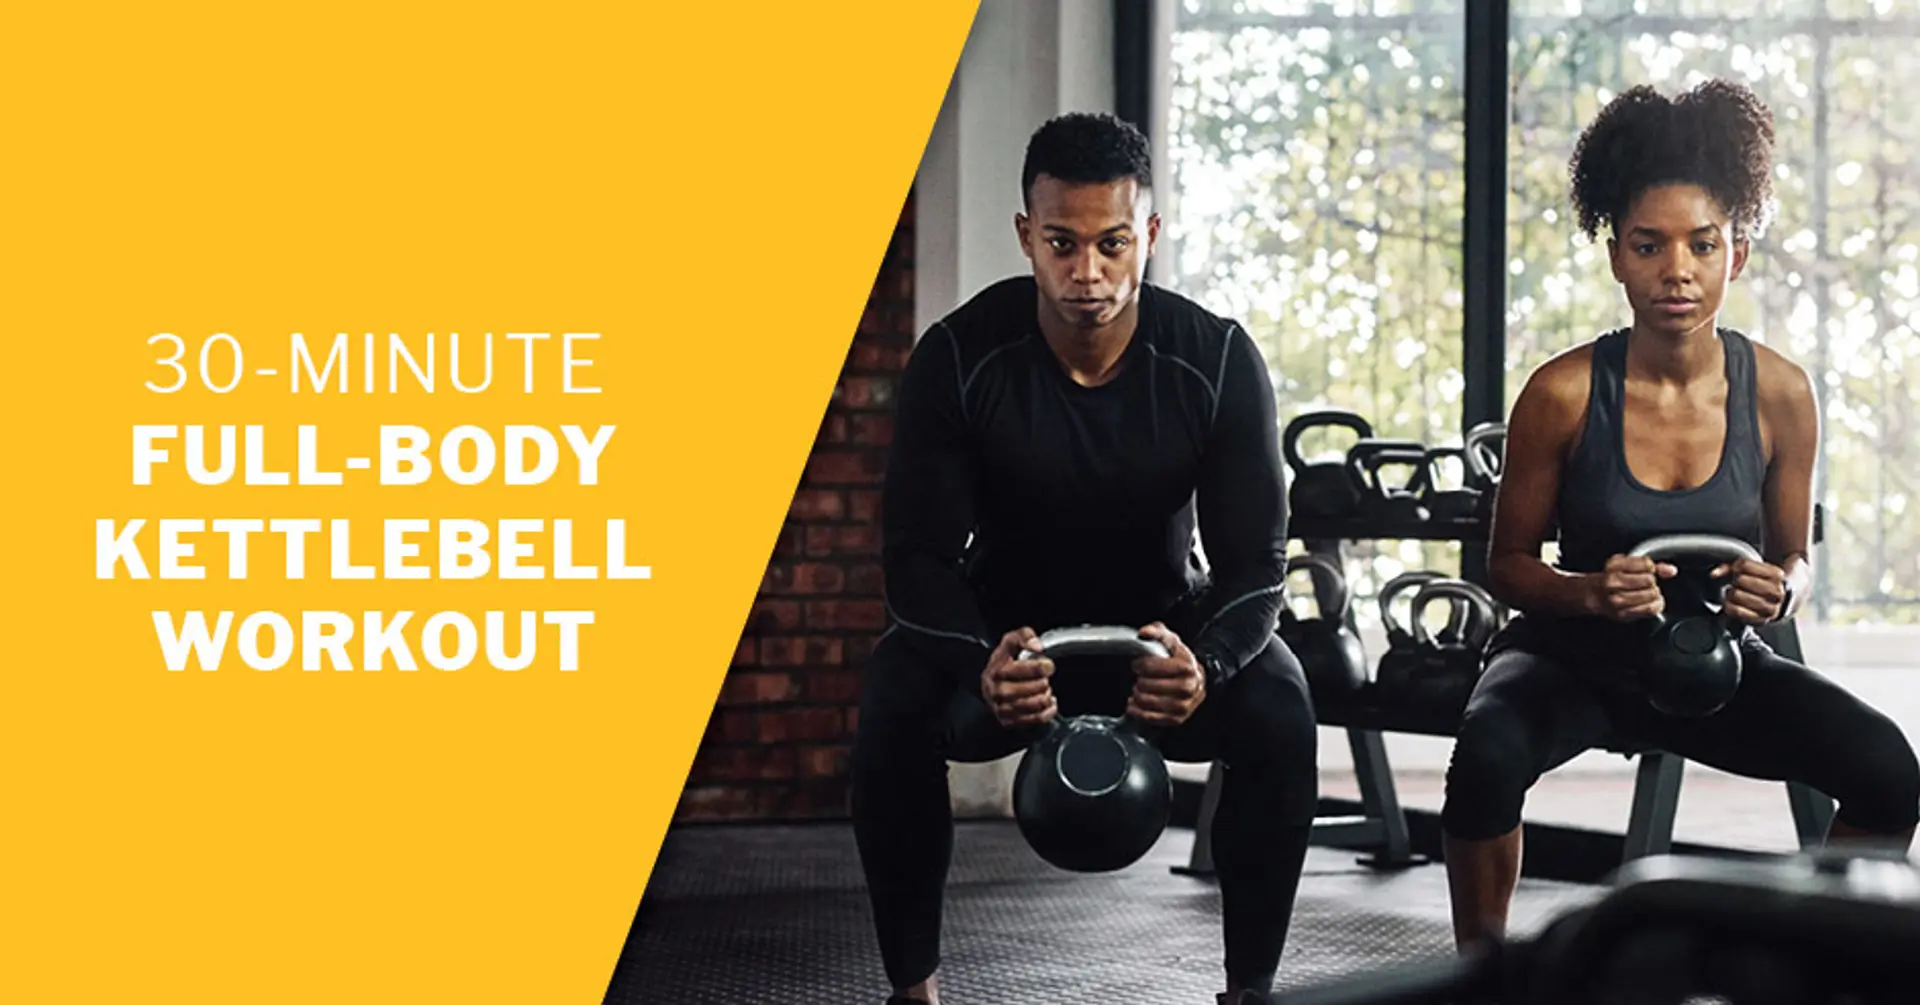 Ultimate Guide to Kettlebell Workouts